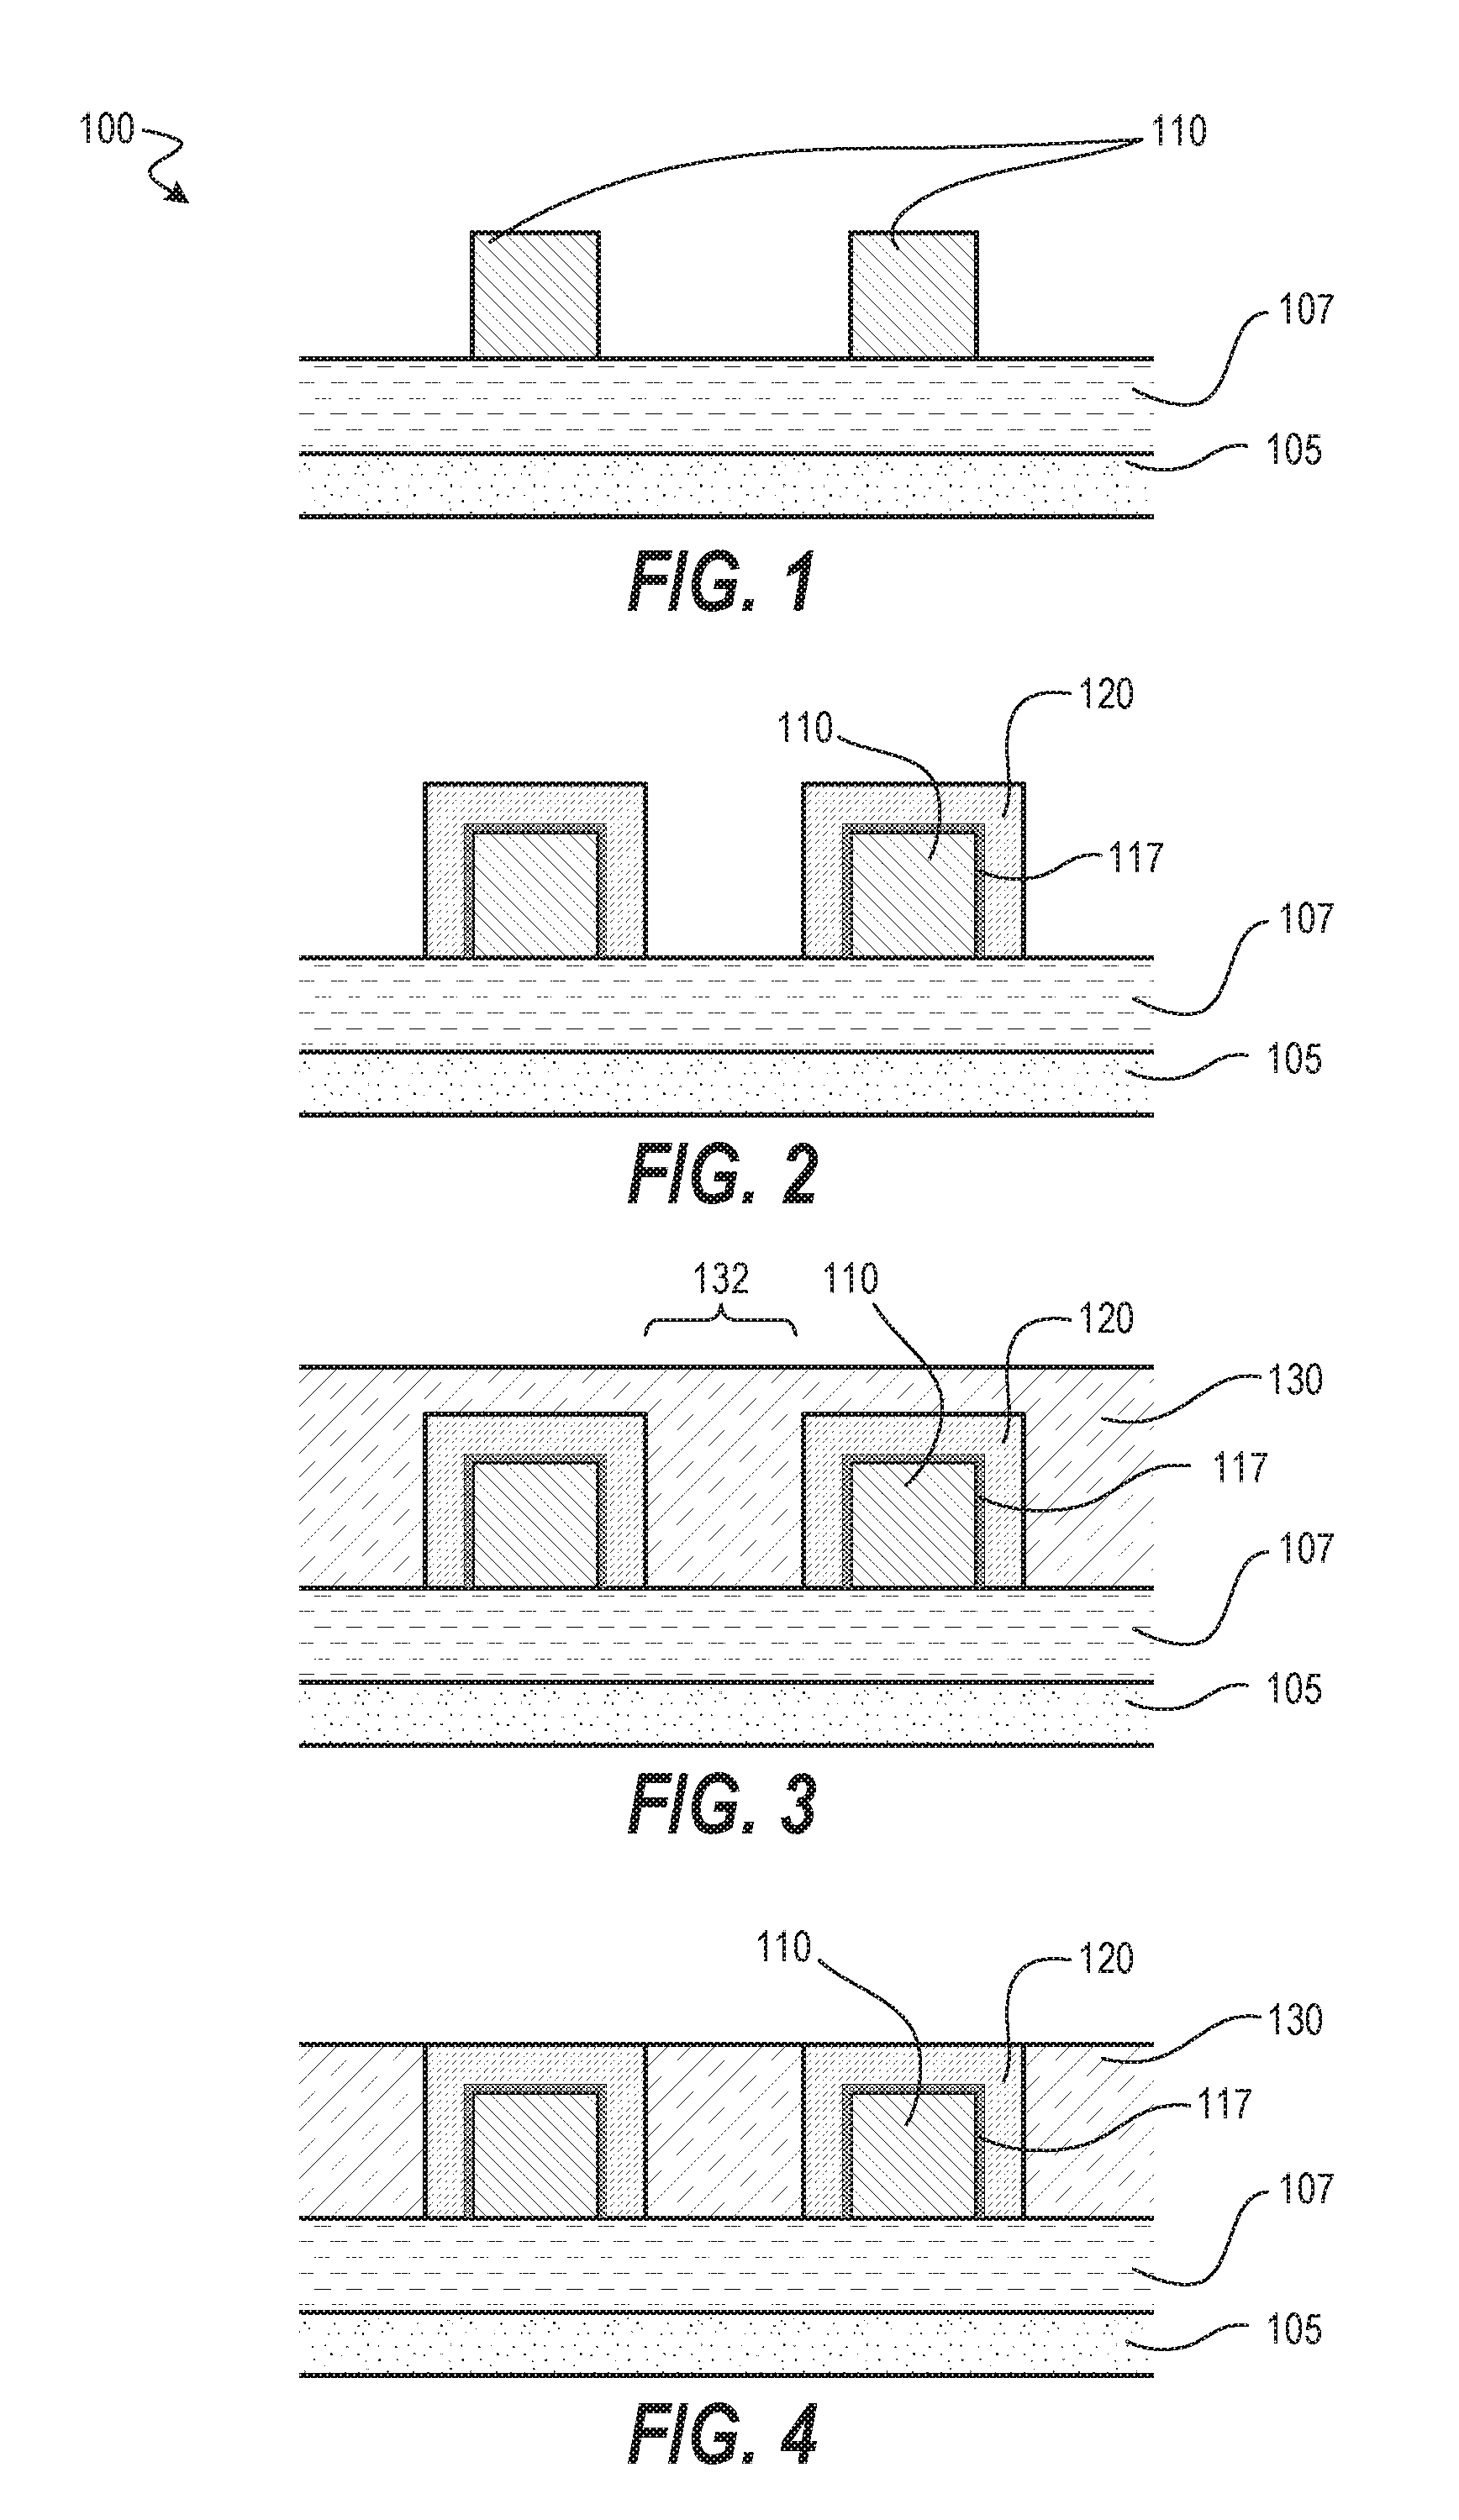 Patterning a Substrate Using Grafting Polymer Material